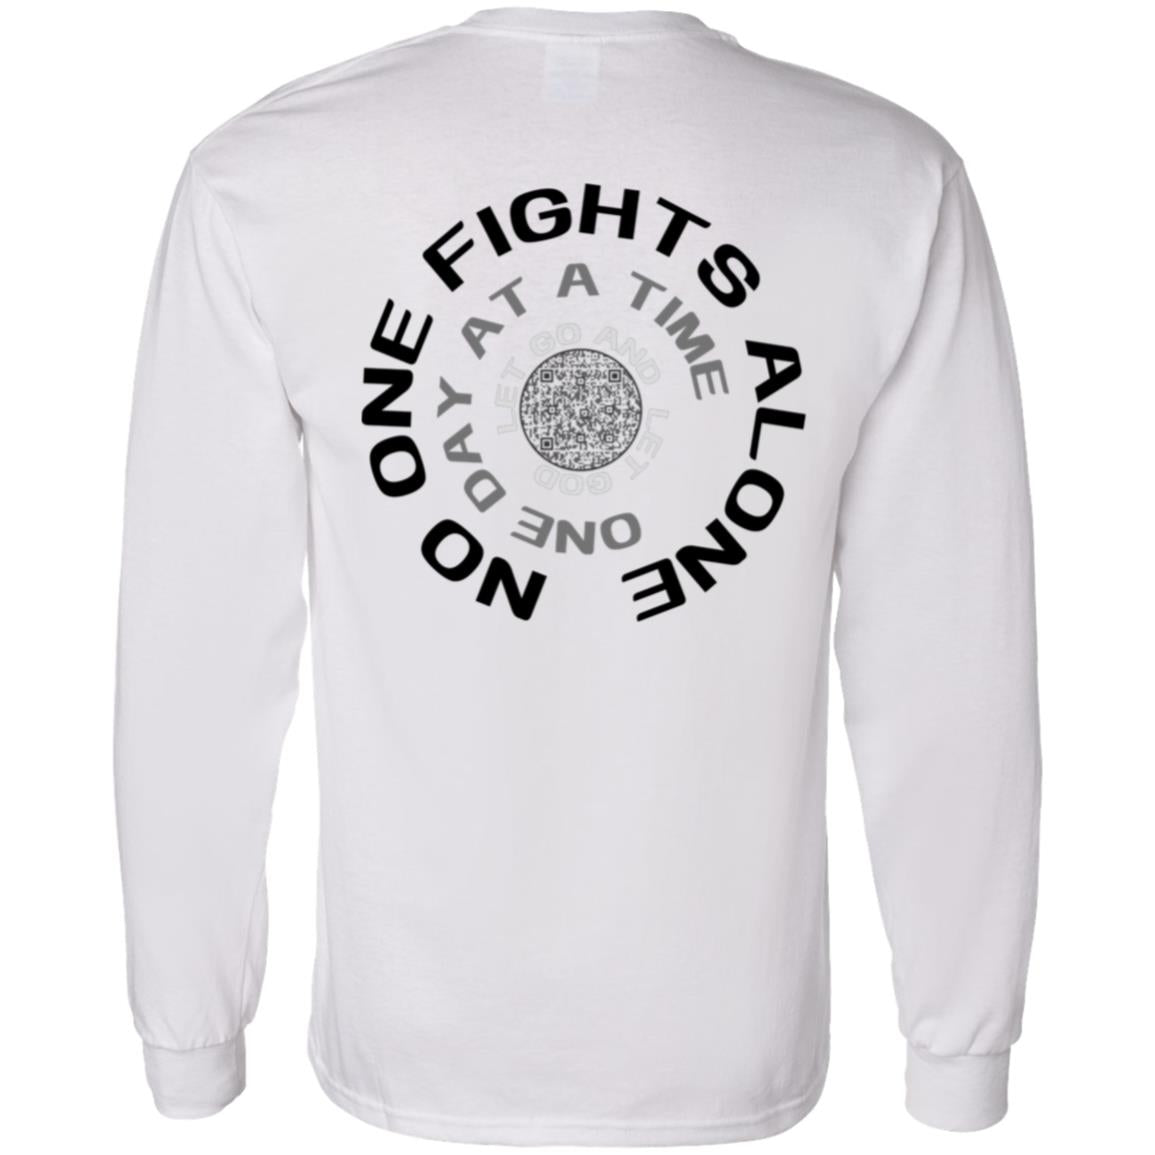 Together Strong Long Sleeve Tee - HopeLinks QrClothes (Copy)